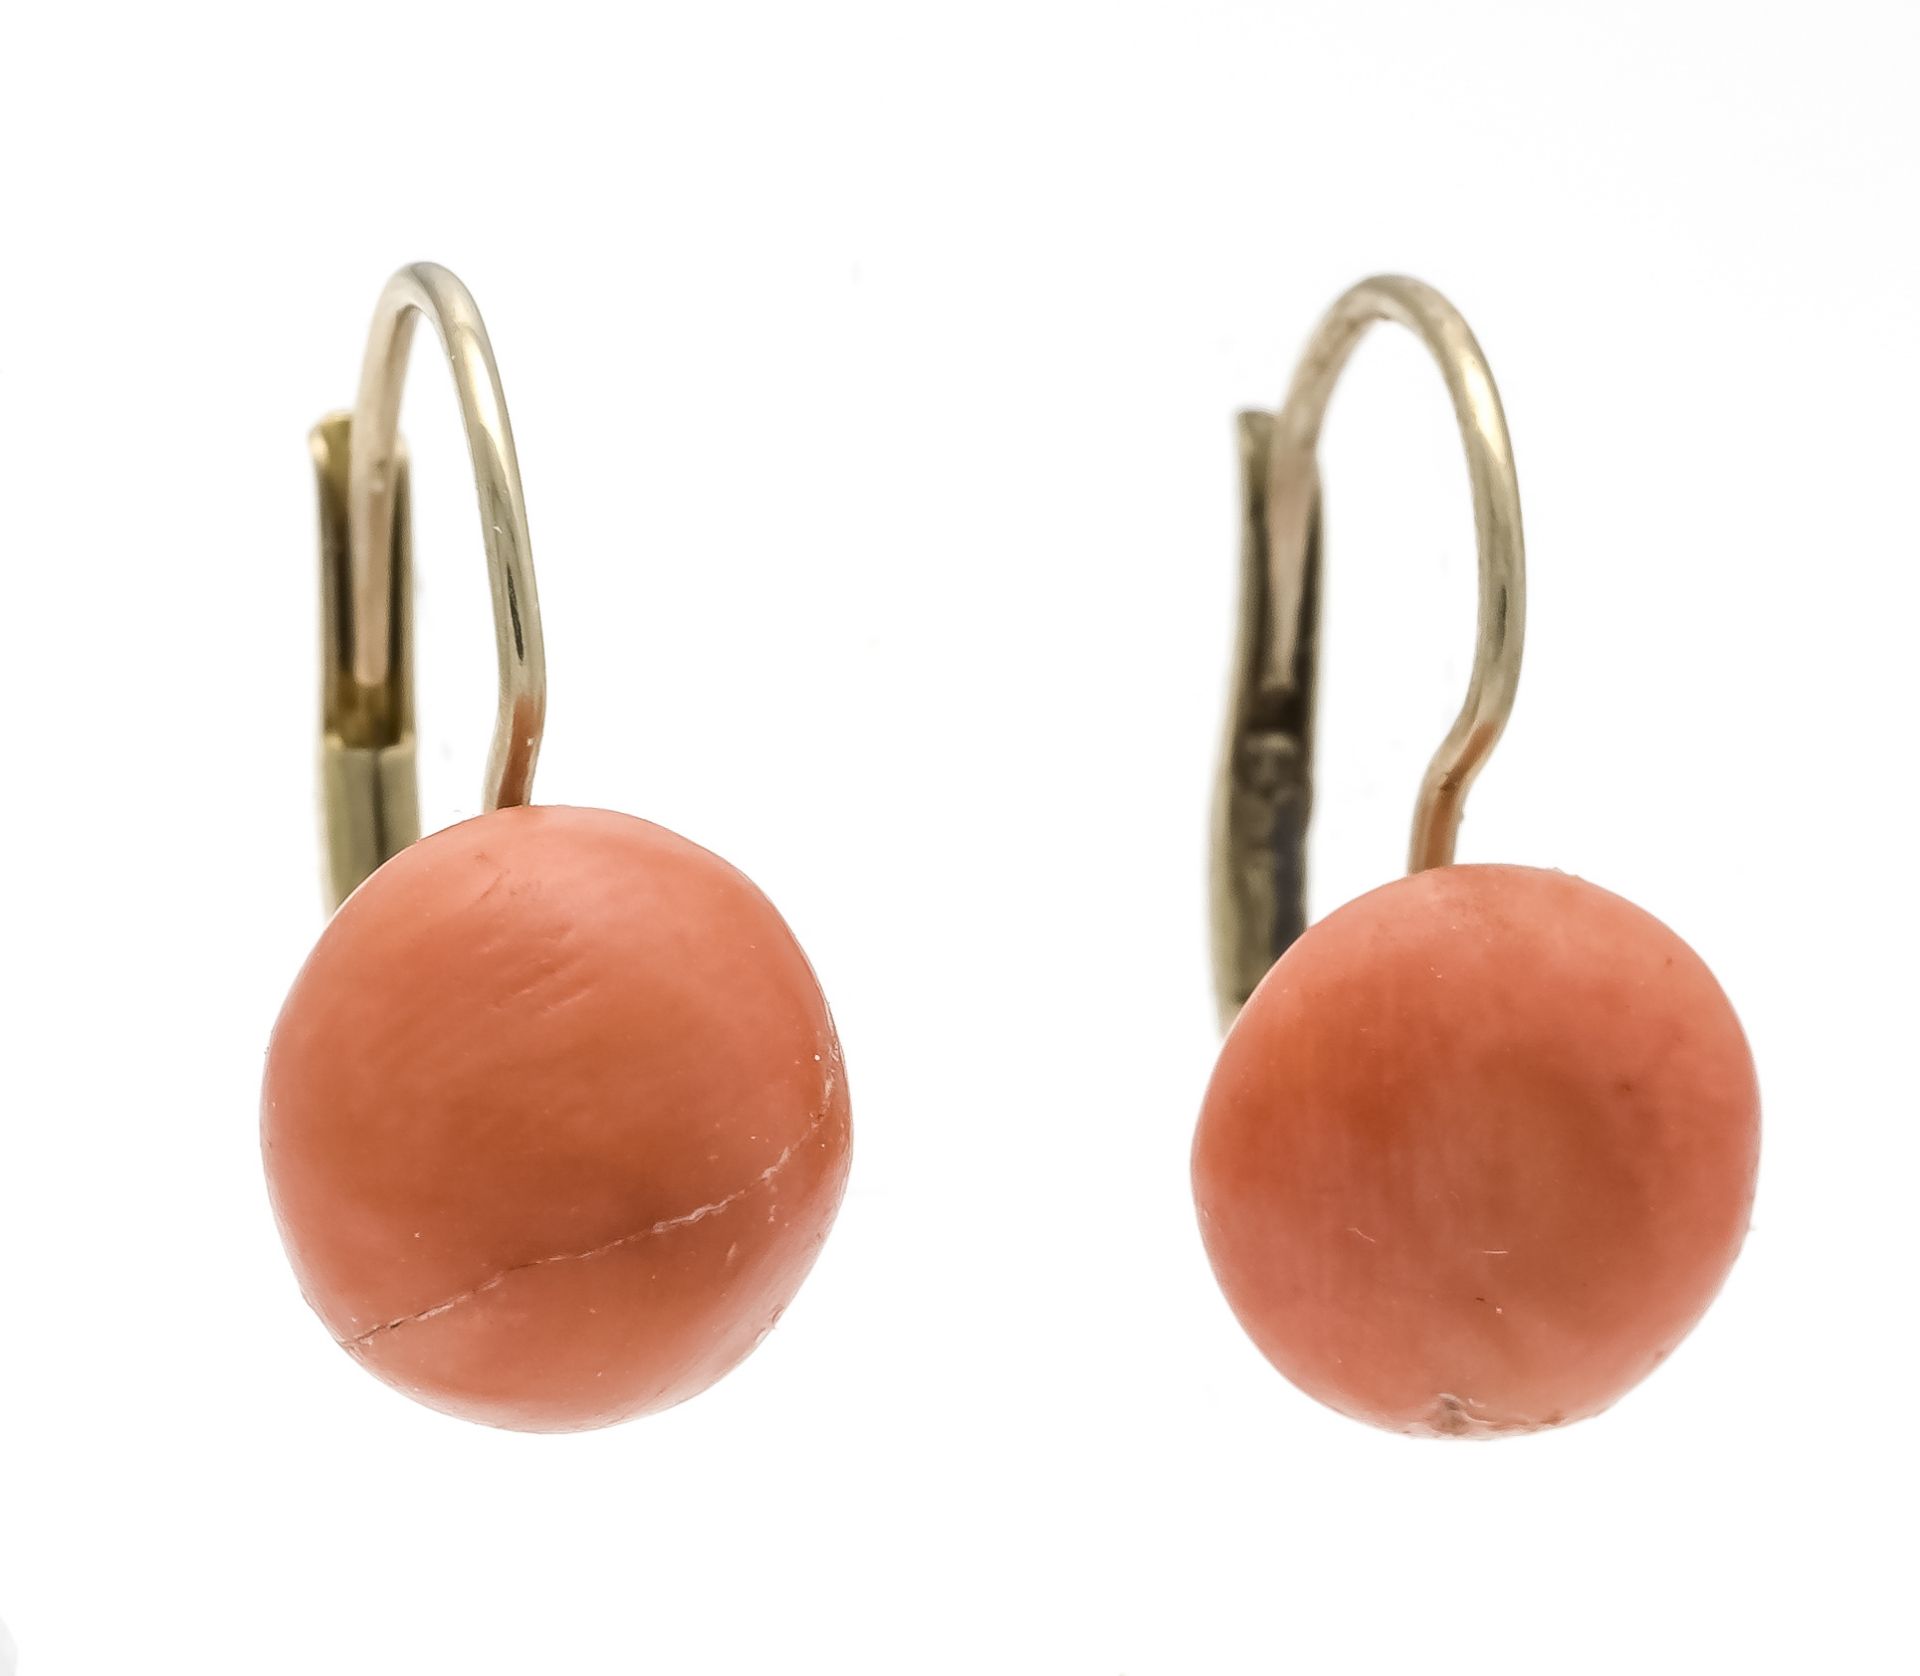 Coral earrings GG 333/000 with 2 round coral boutons 8 mm in salmon pink, one bouton with glued